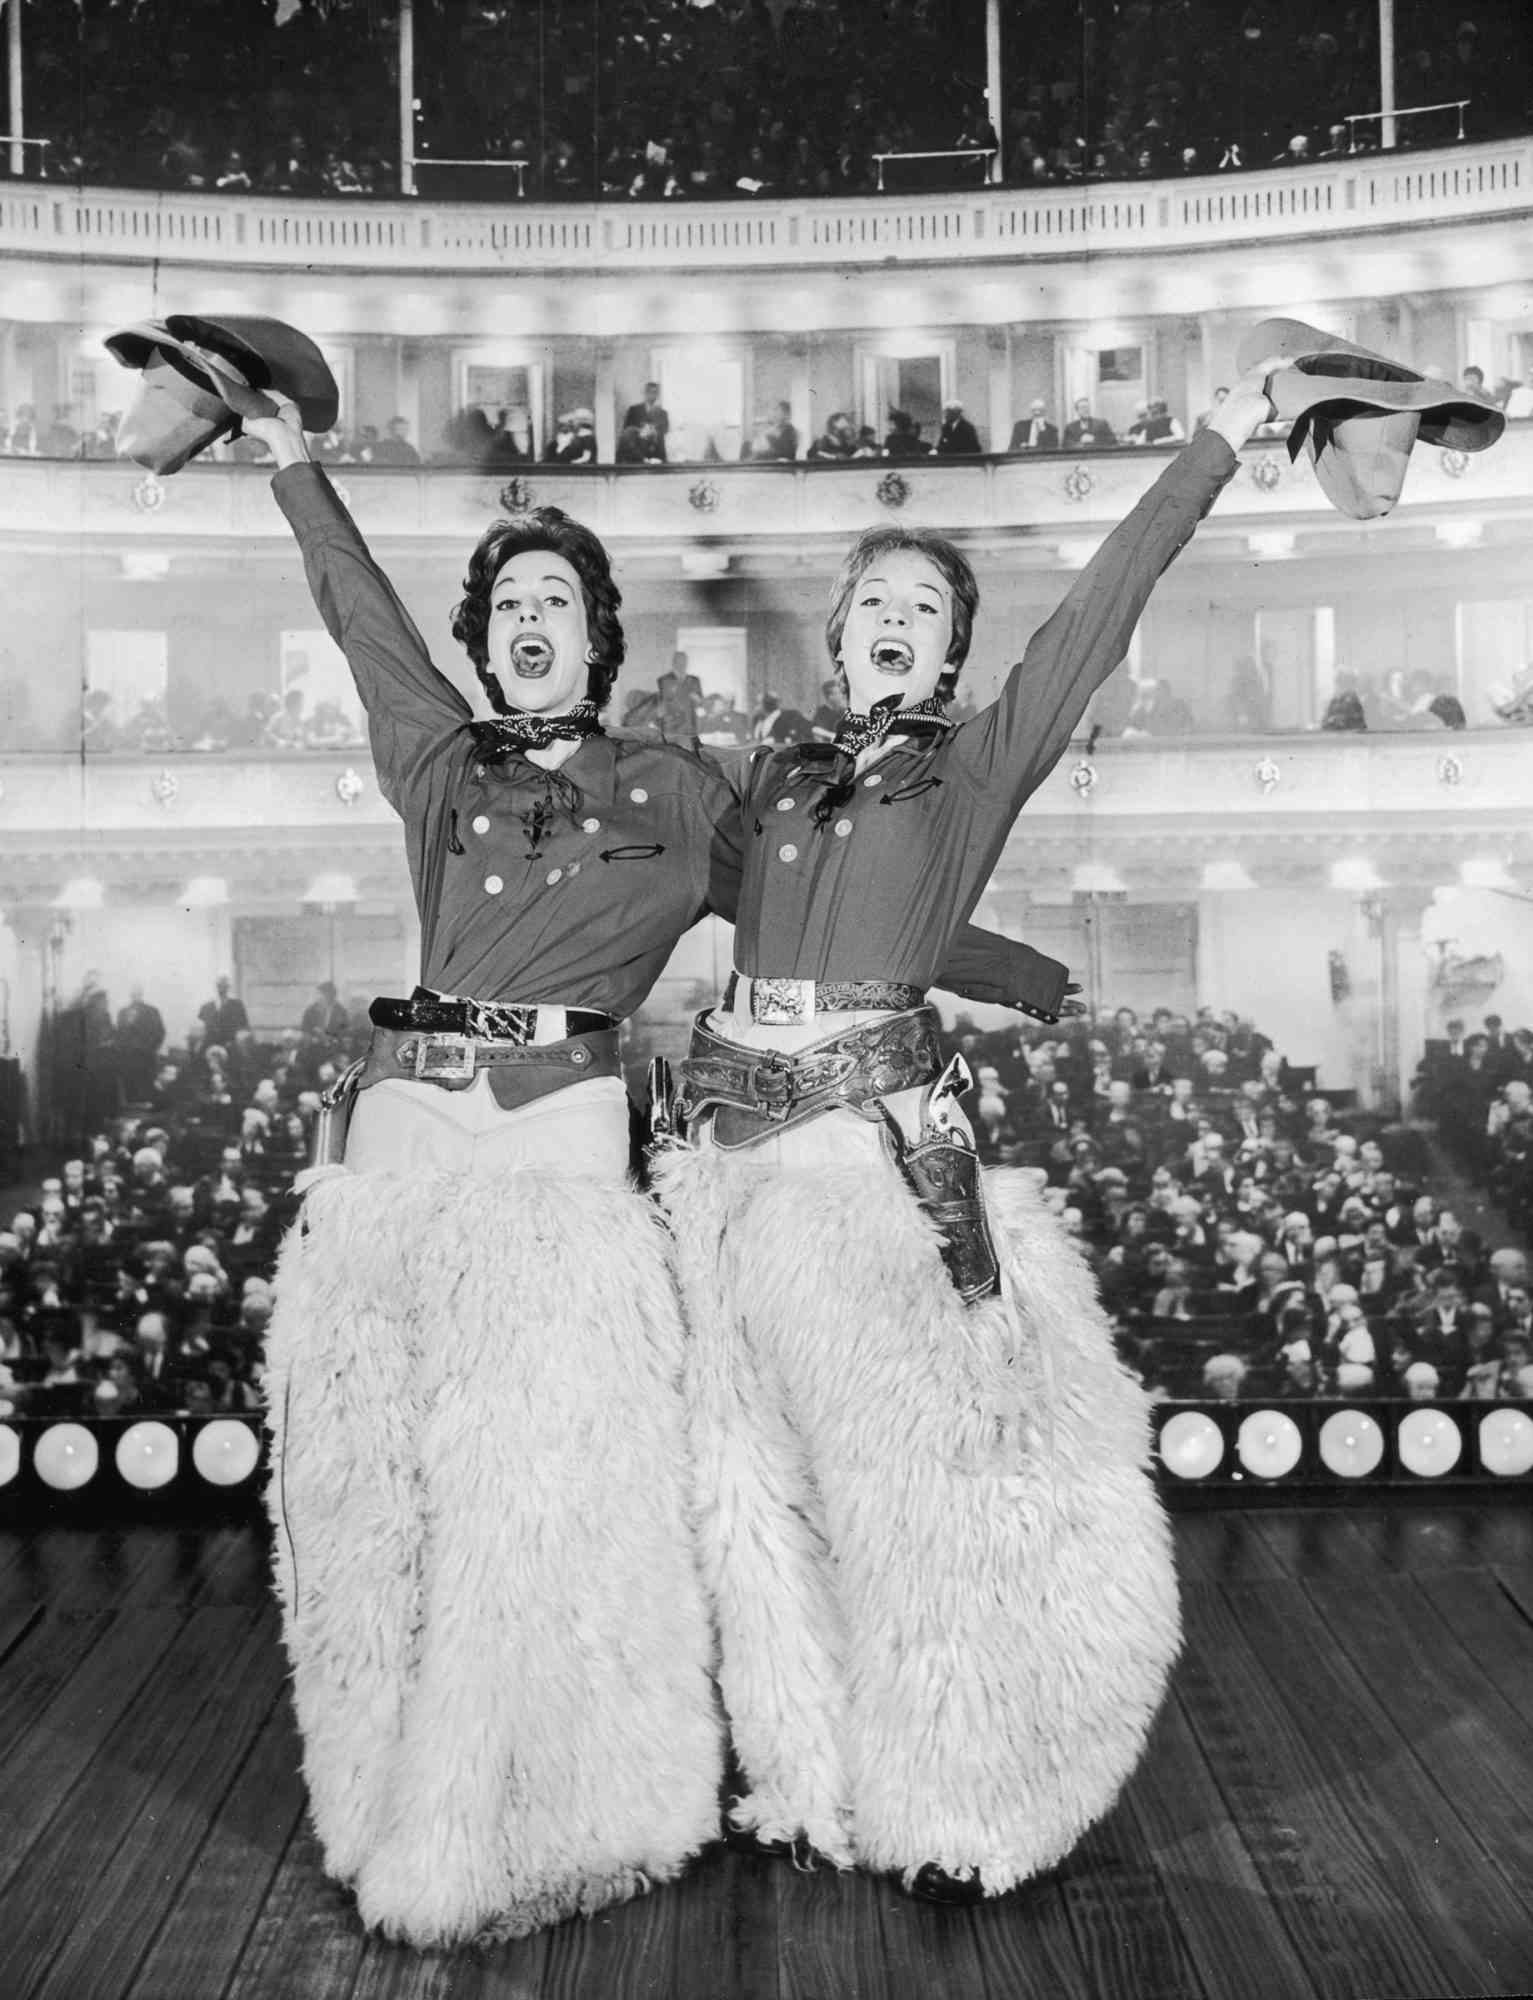 American actor and comedian Carol Burnett (left) and British singer and actor Julie Andrews perform on-stage in Old Western outfits